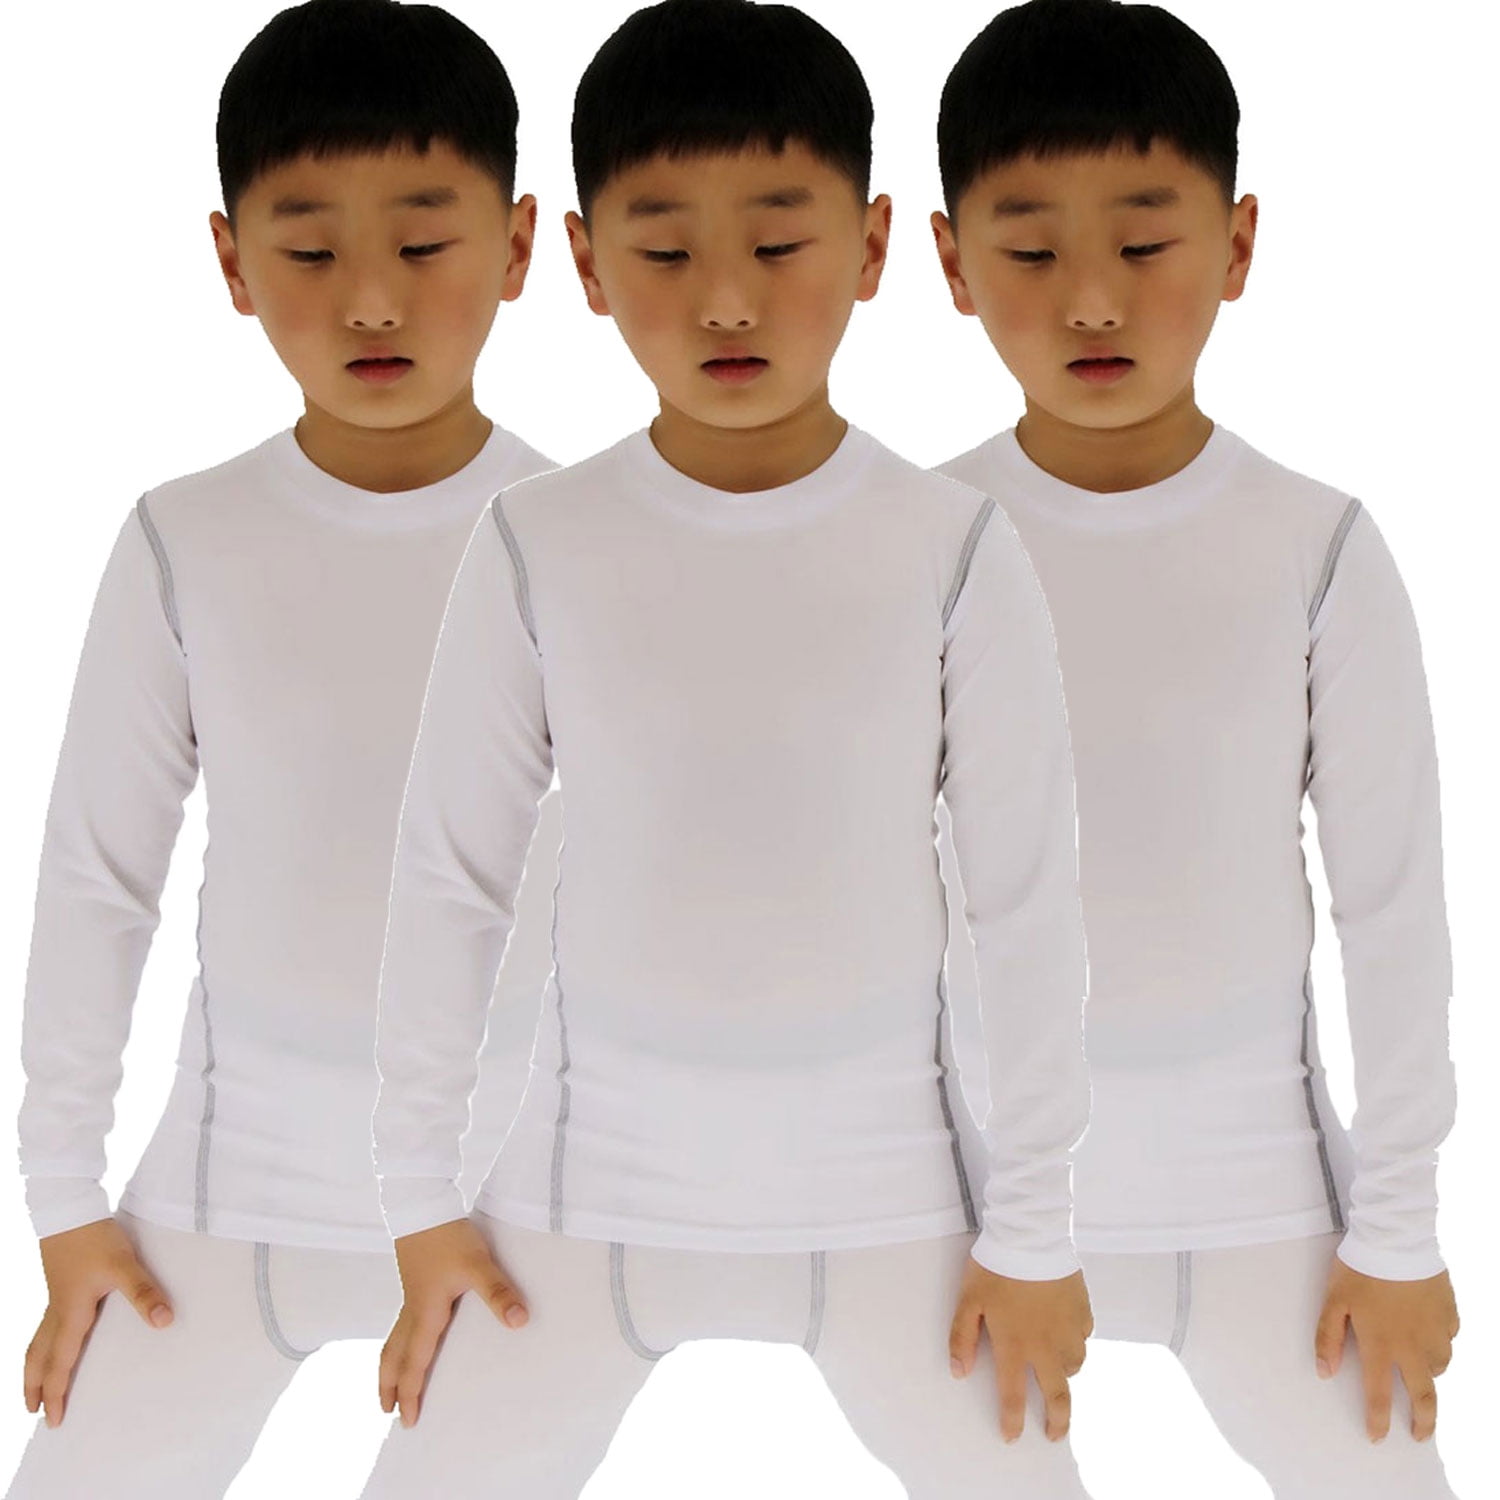 LANBAOSI Kids Running T-shirt Compression Quick Dry Breathable